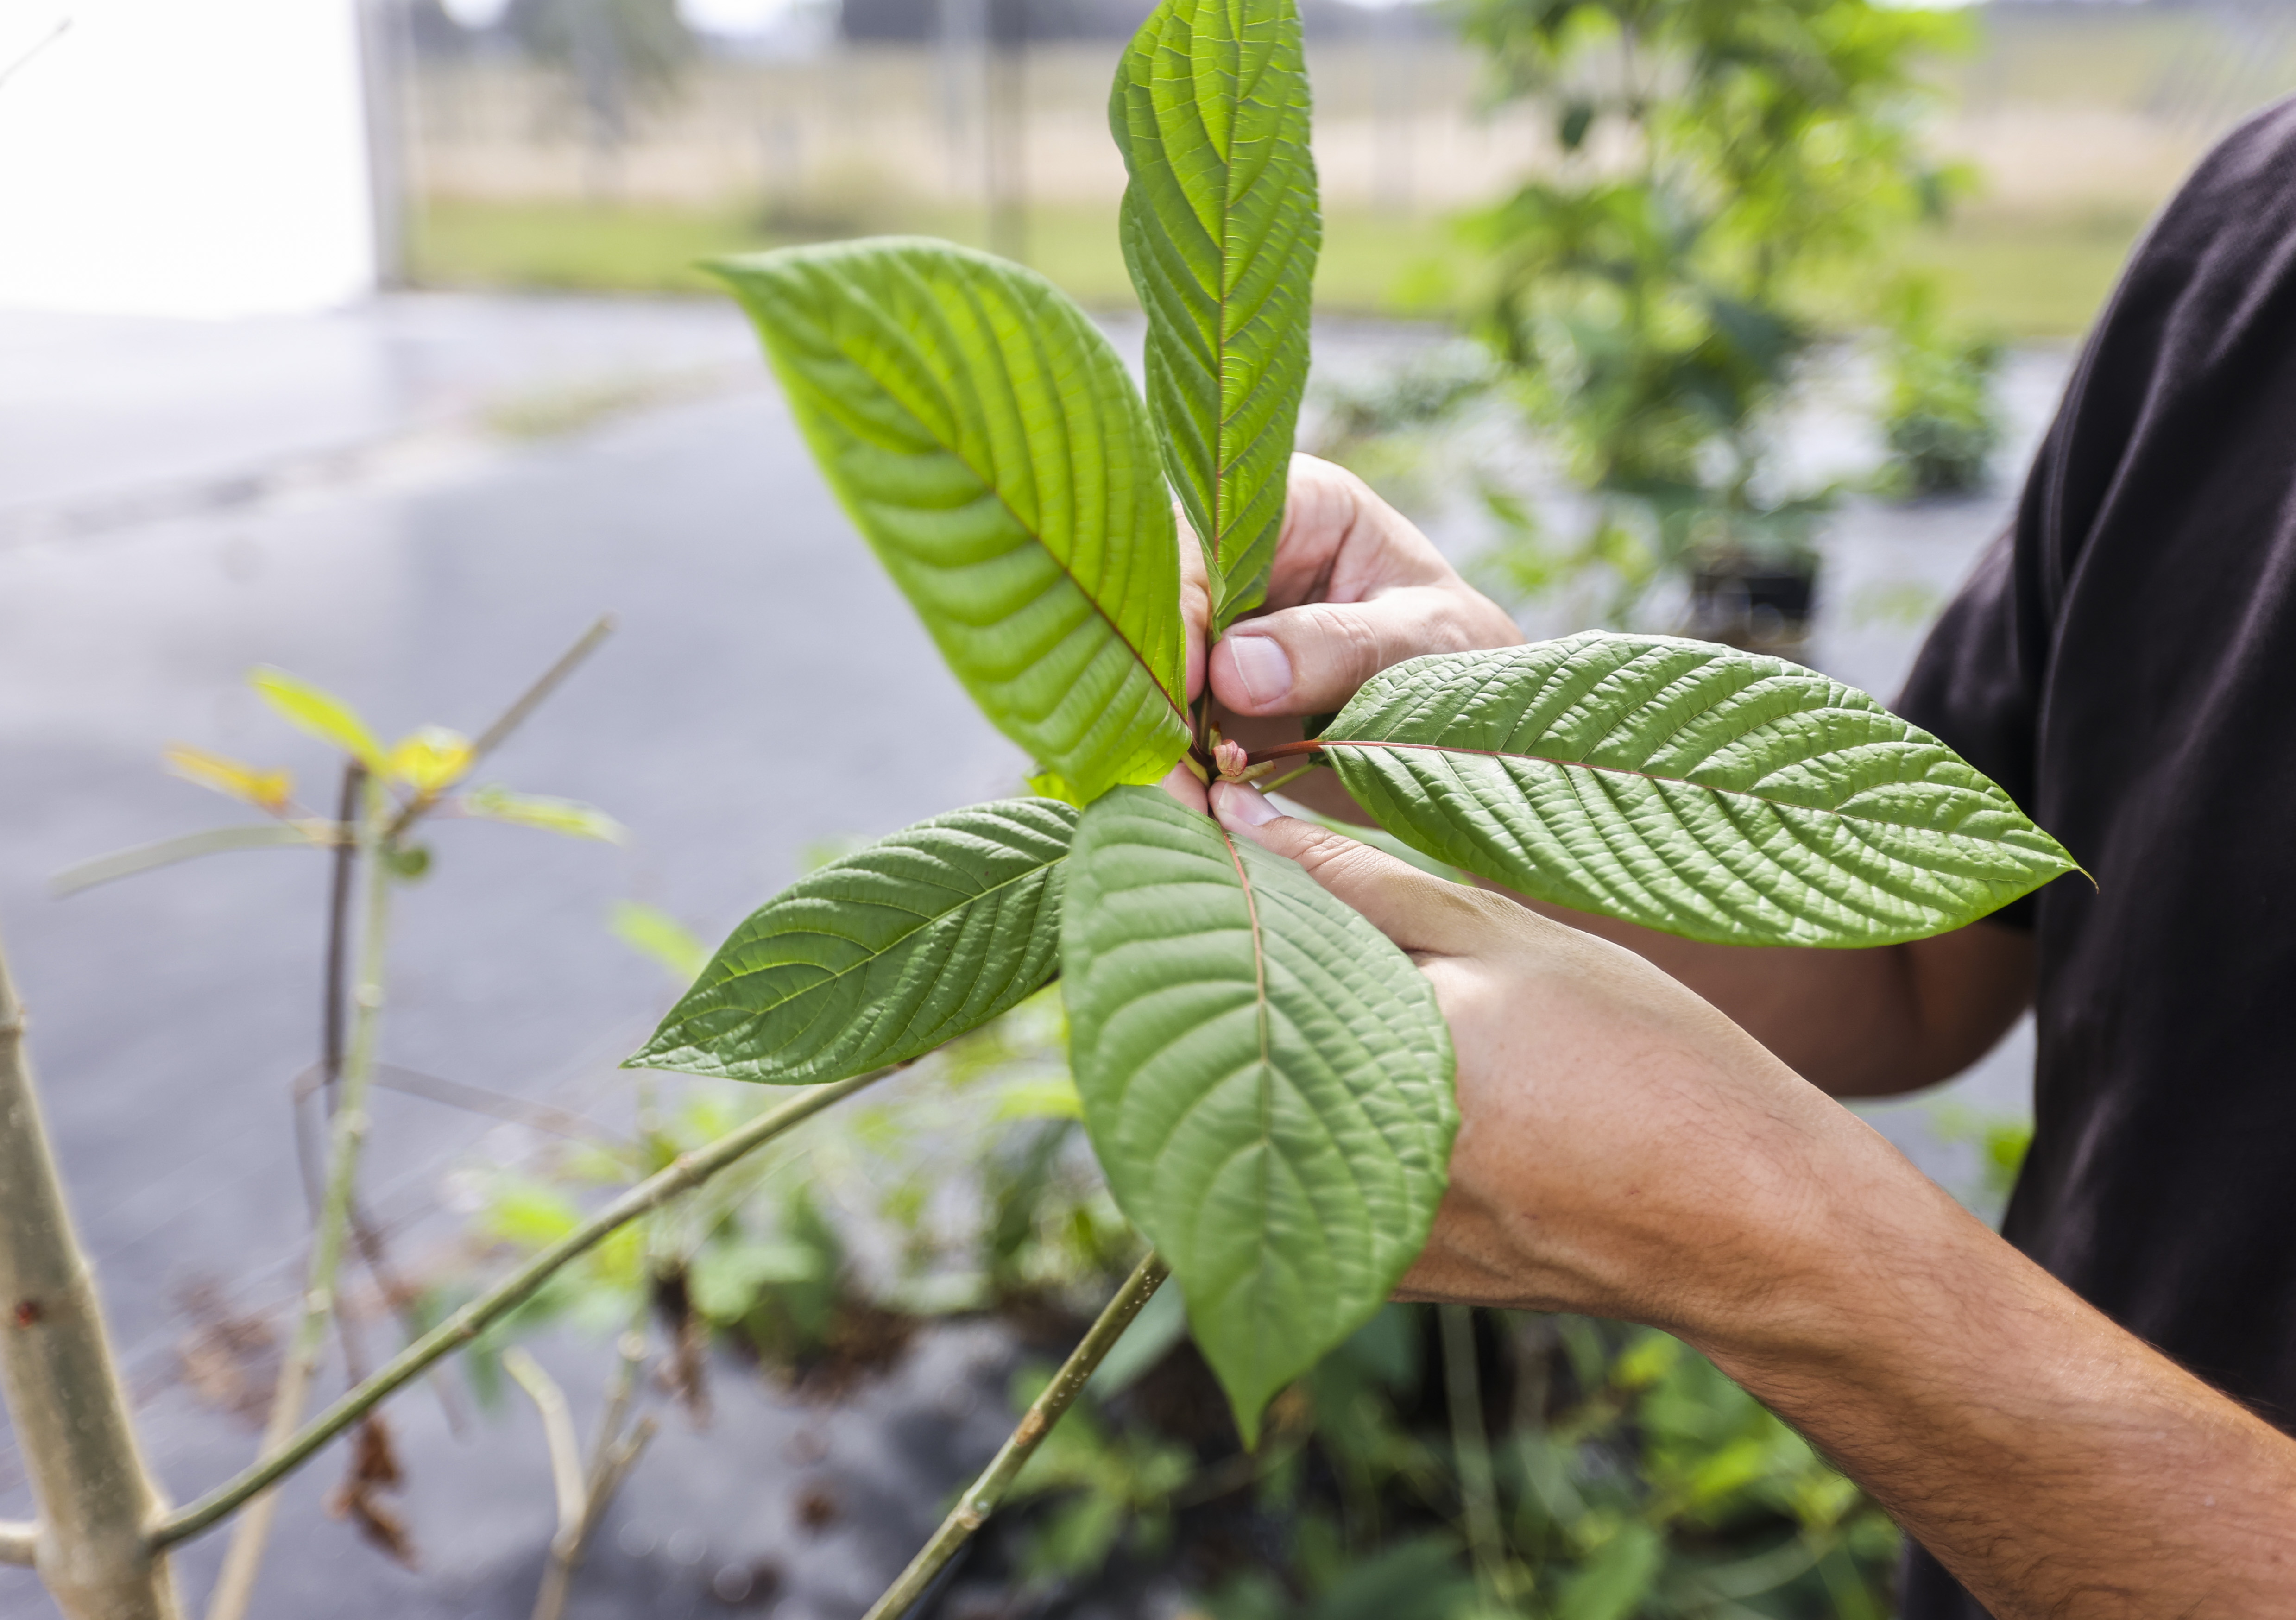 University of Florida researchers grow kratom in Apopka. Many
                  scientists believe the herb is a safer alternative to drugs driving
                  the opioid epidemic. But the FDA has chosen to leave kratom sold in
                  the U.S. largely unregulated.